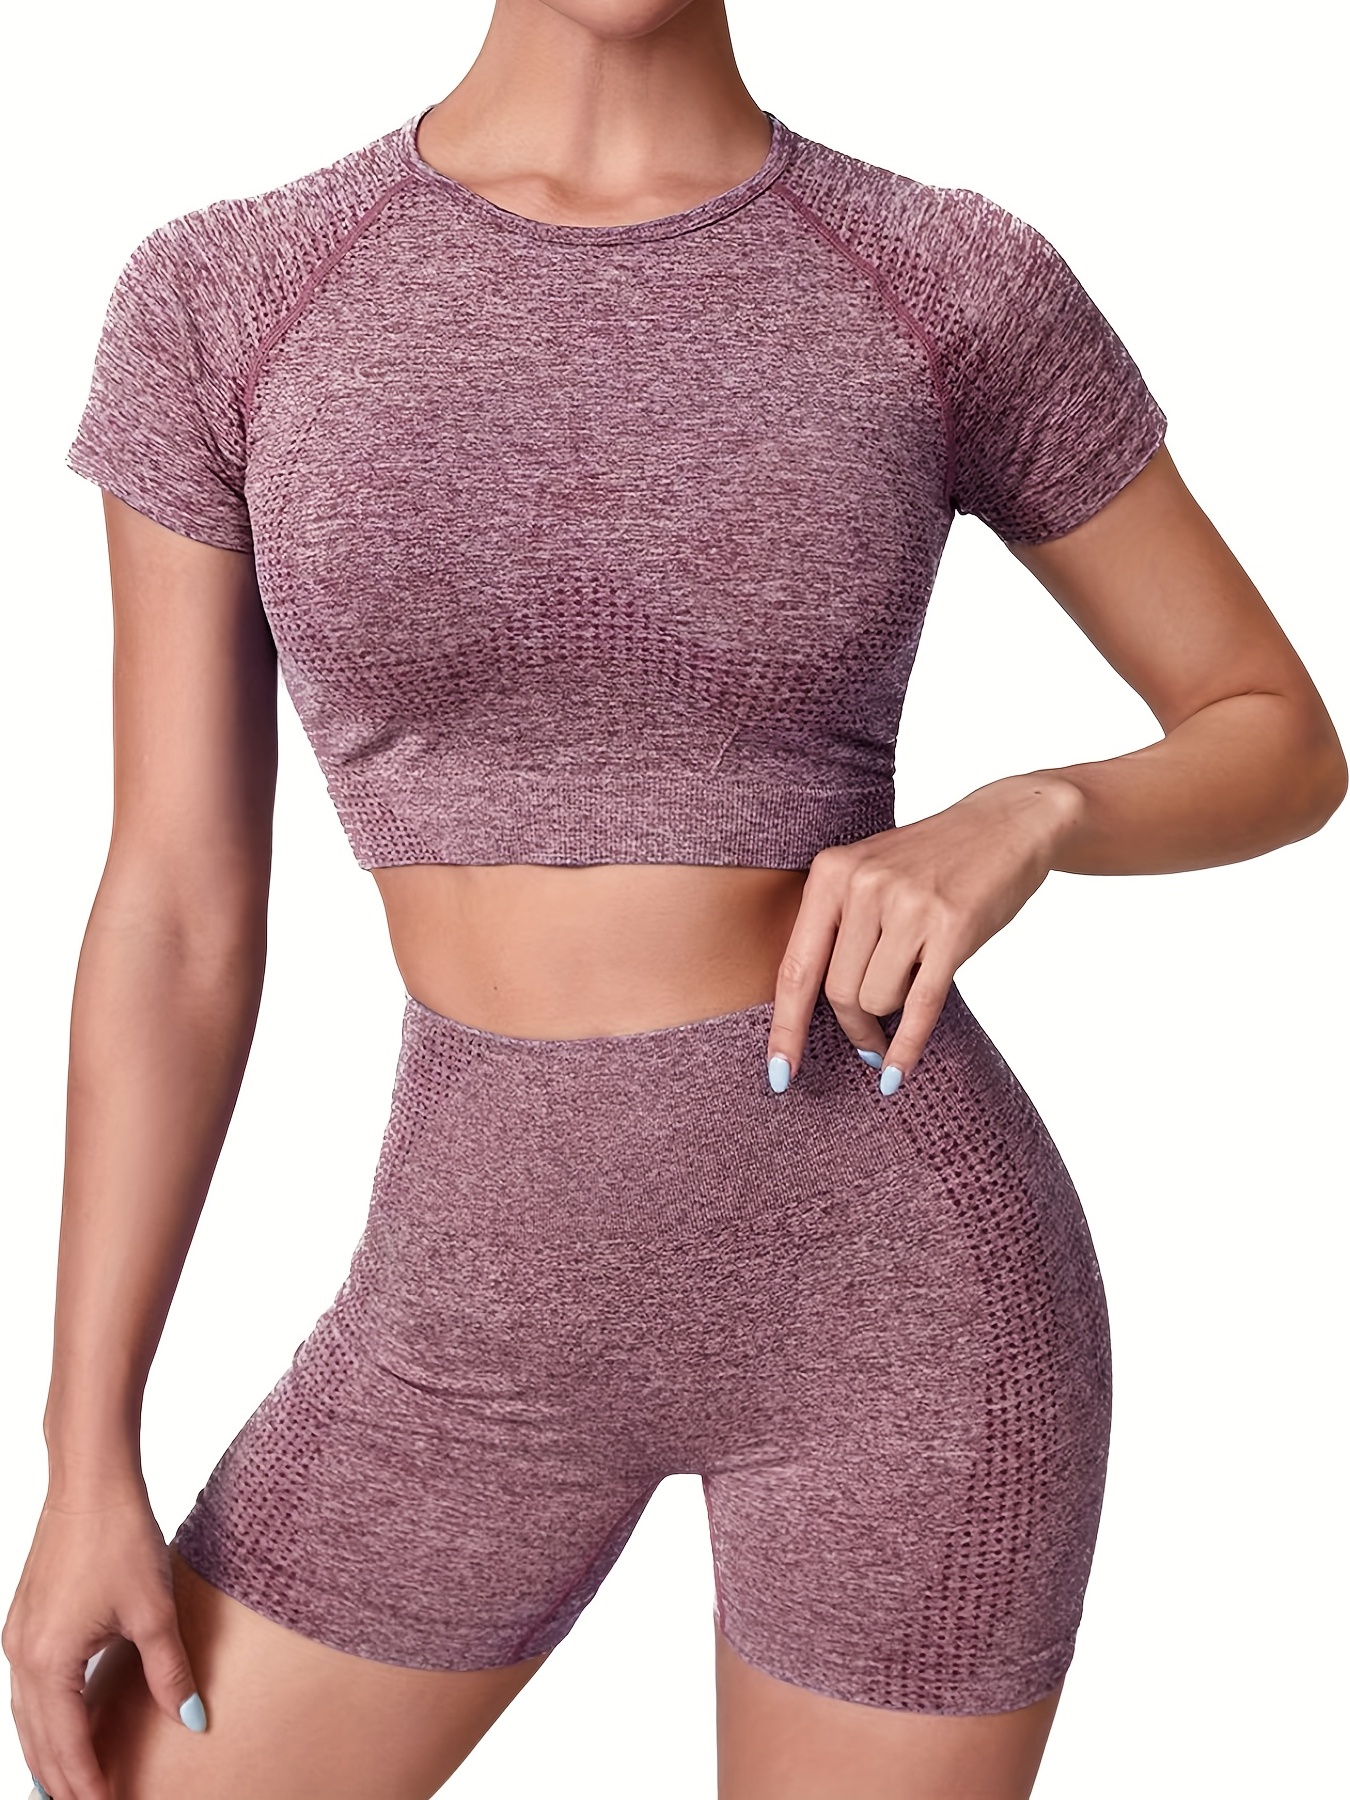 Yoga Basic Pink Backless Seamless High Stretch Women's Sports Suit workout  set